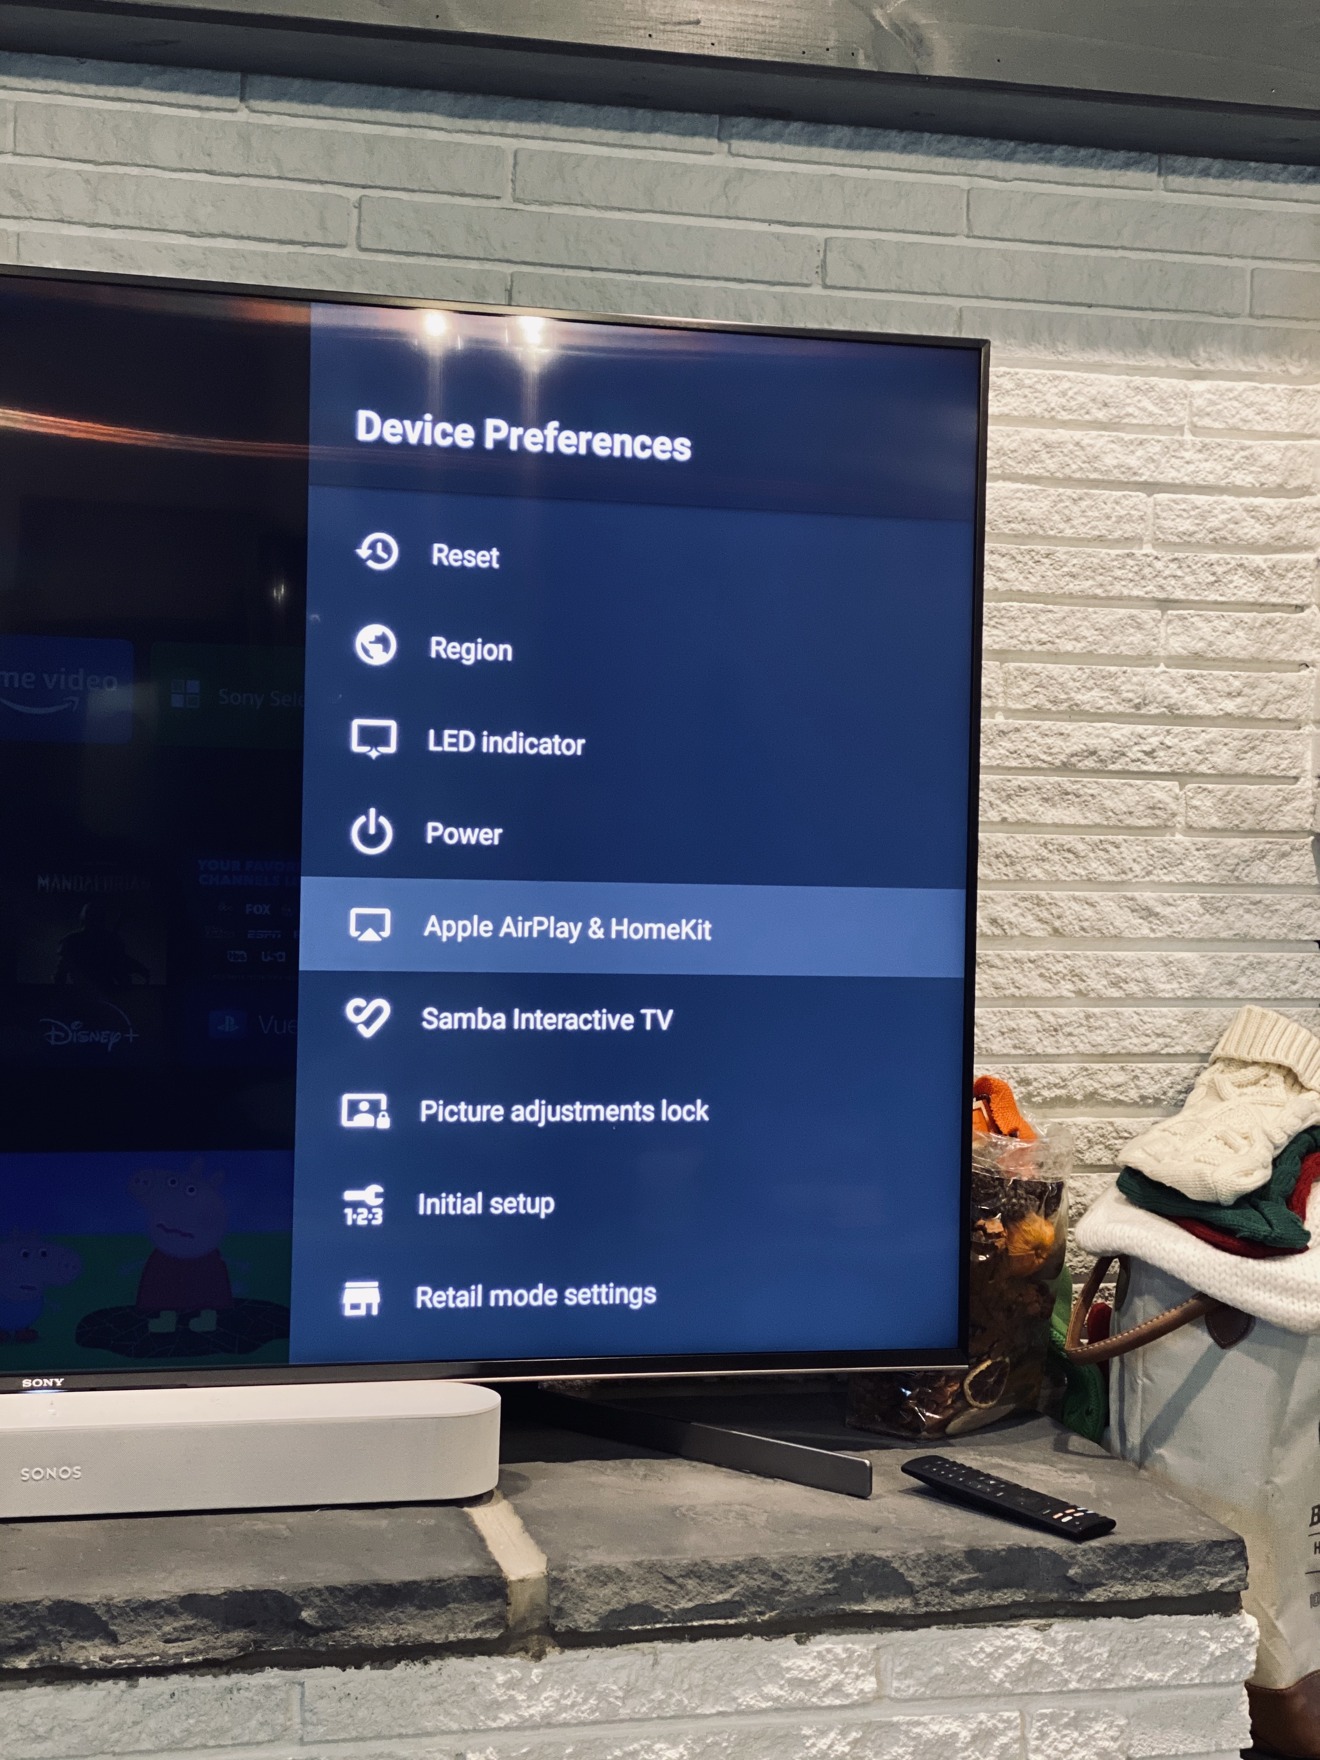 Hot And Airplay 2 On Sony Smart Tvs, Does Apple Screen Mirroring Work With Sony Tv